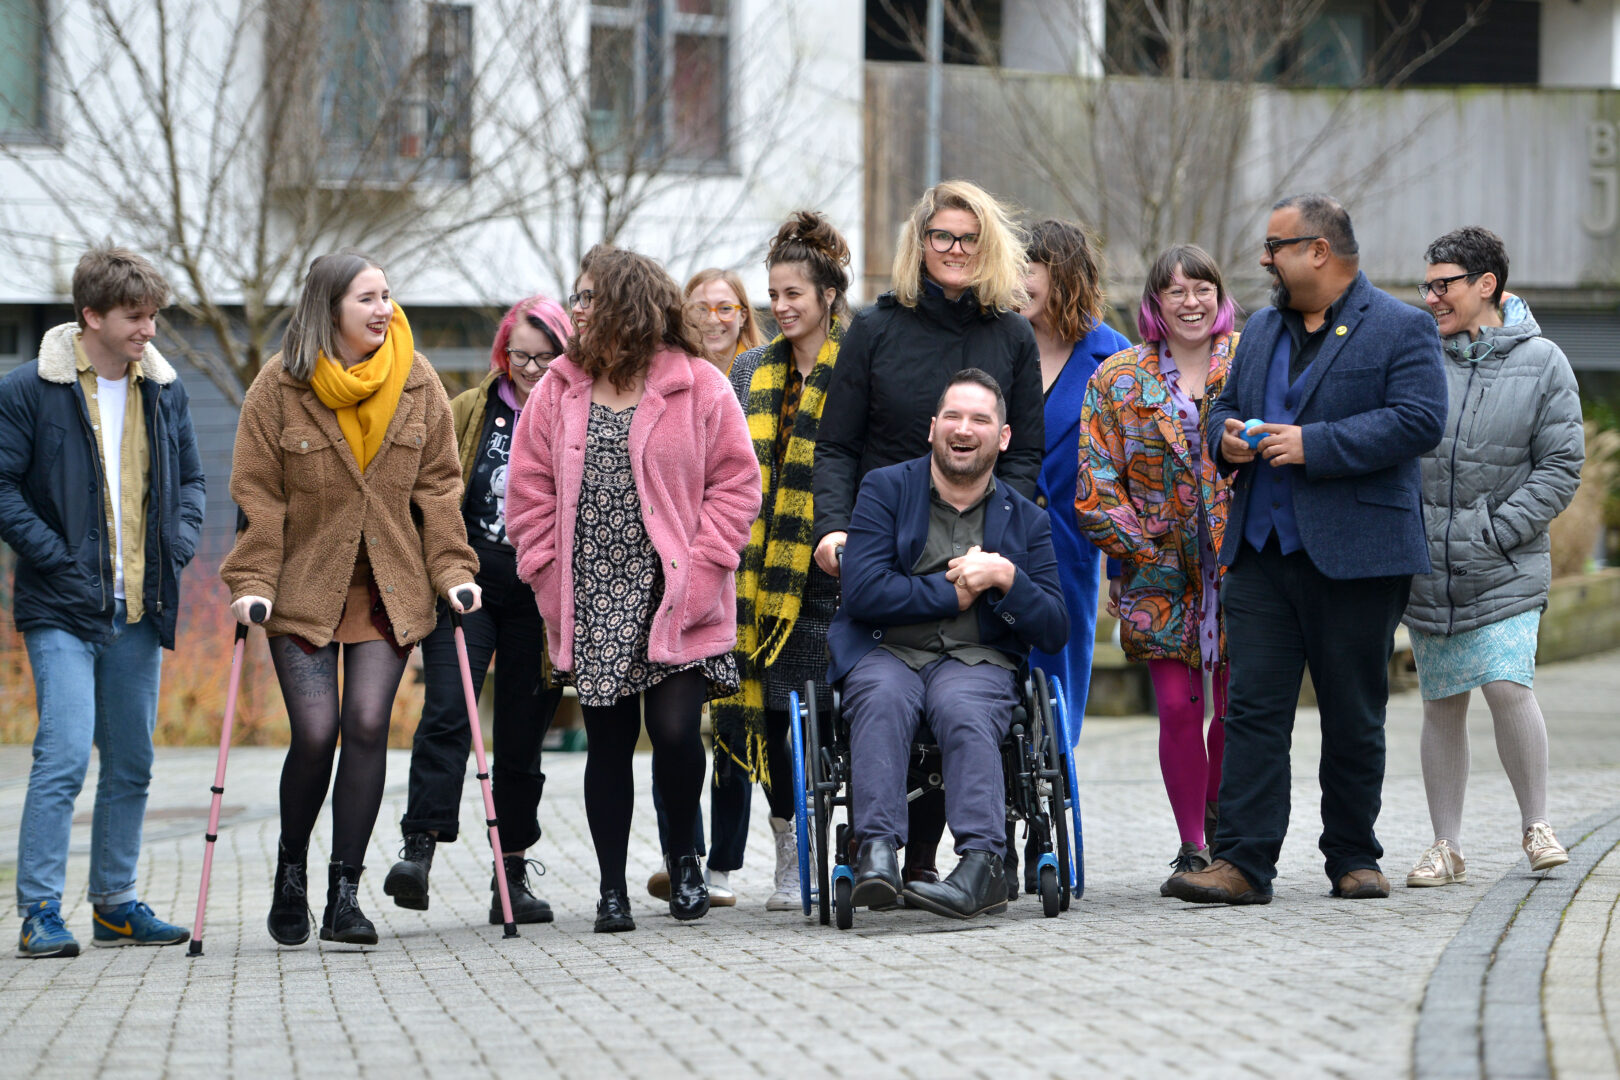 12 members of the D&A team are outside. They are in movement towards the camera, but as they move are looking at each other and laughing or smiling. They are a diverse group with different disabilities, races, genders and heritages.